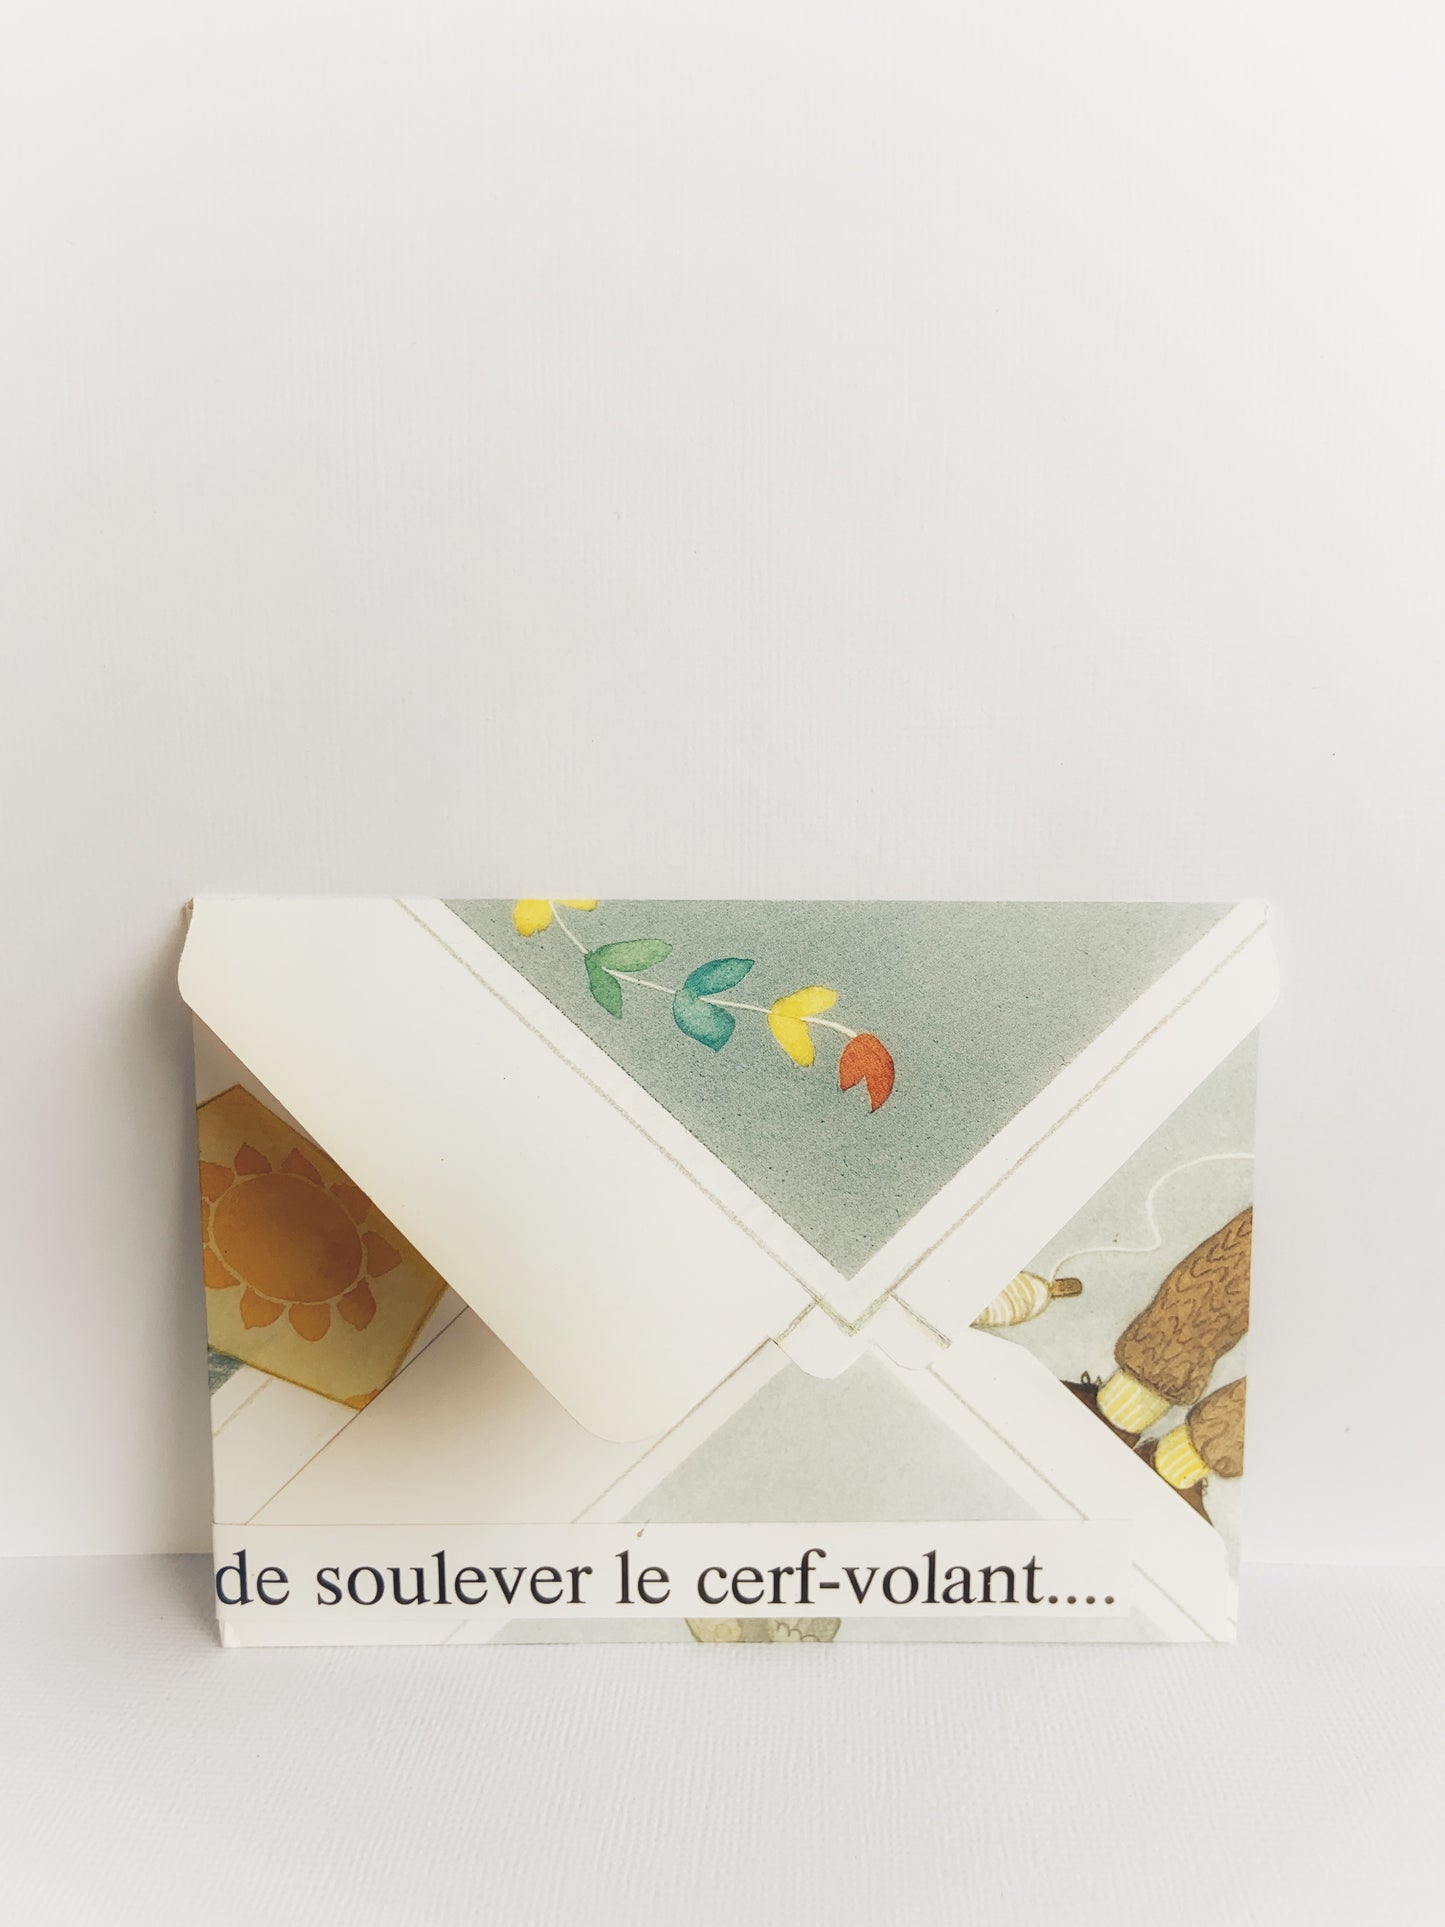 The back of a handmade colorful envelope showing the tail of a kite and 'de soulever le cerf-volant' at the bottom. 